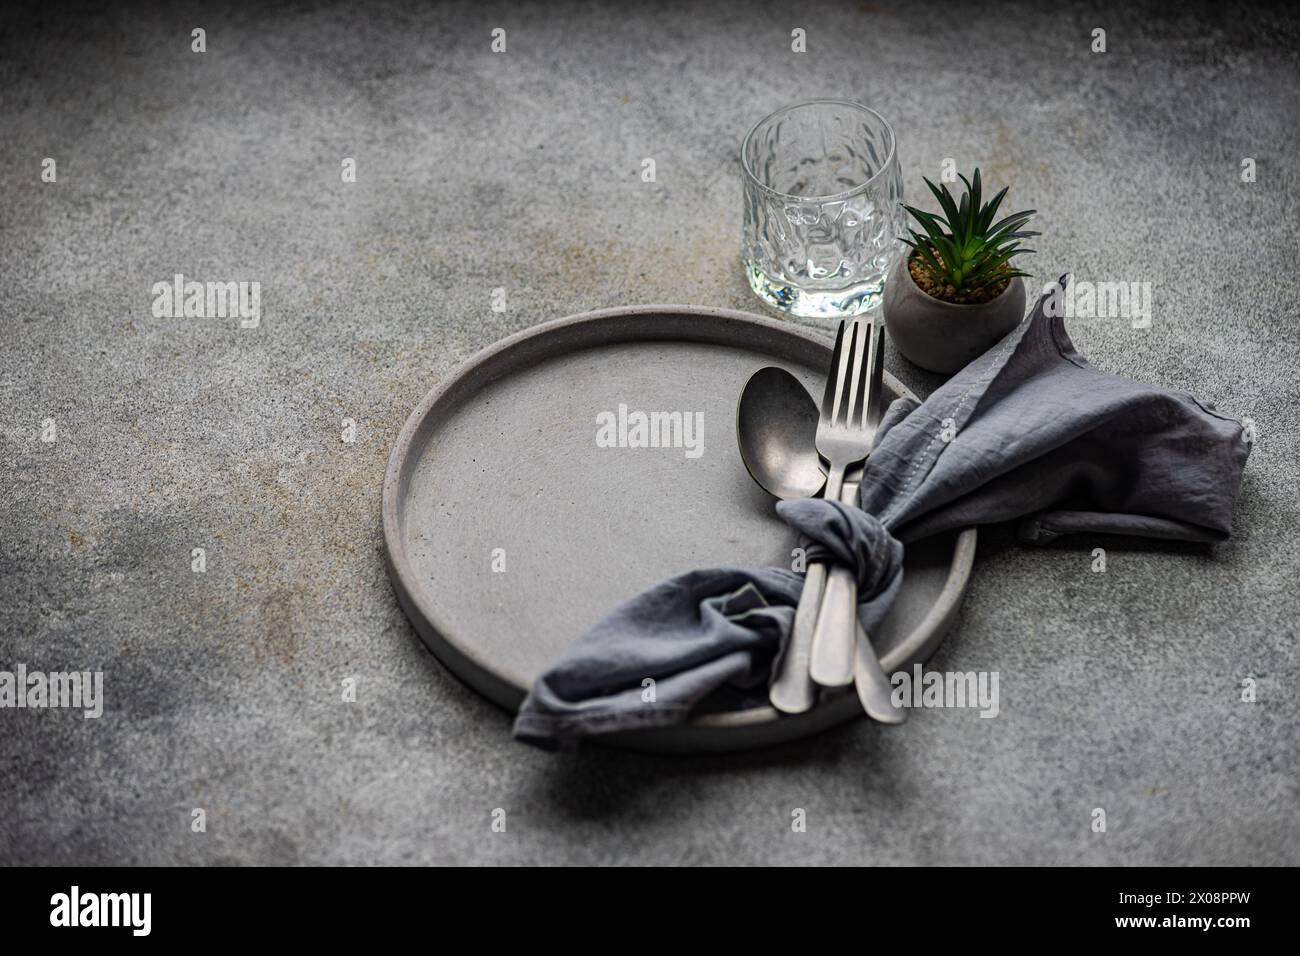 A tasteful minimalist table setting showcasing a ceramic plate, silver cutlery bundled in a grey napkin, a textured glass, and a miniature succulent p Stock Photo